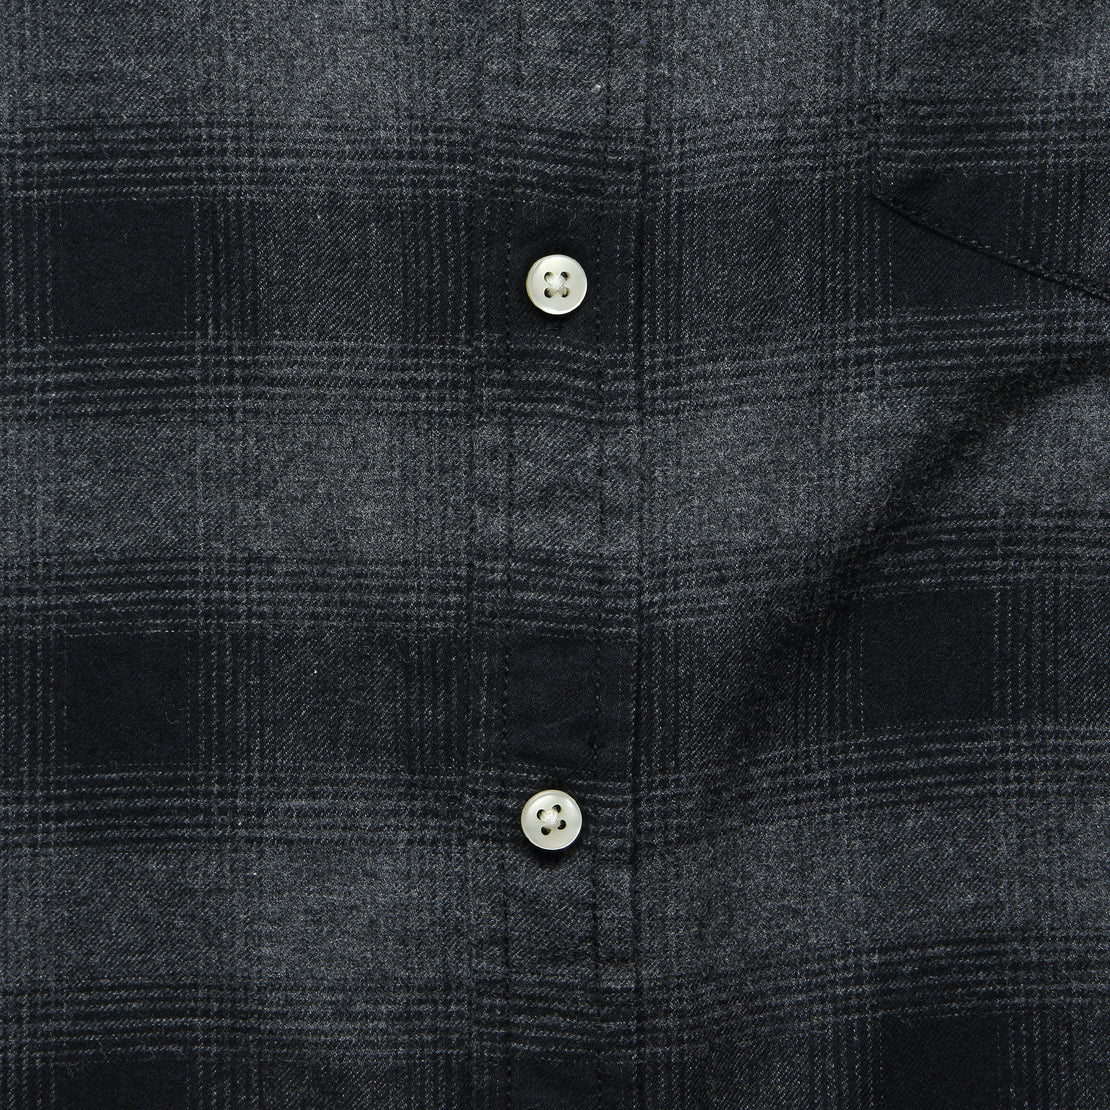 Lumberjack Flannel - Black - Life After Denim - STAG Provisions - Tops - L/S Woven - Plaid